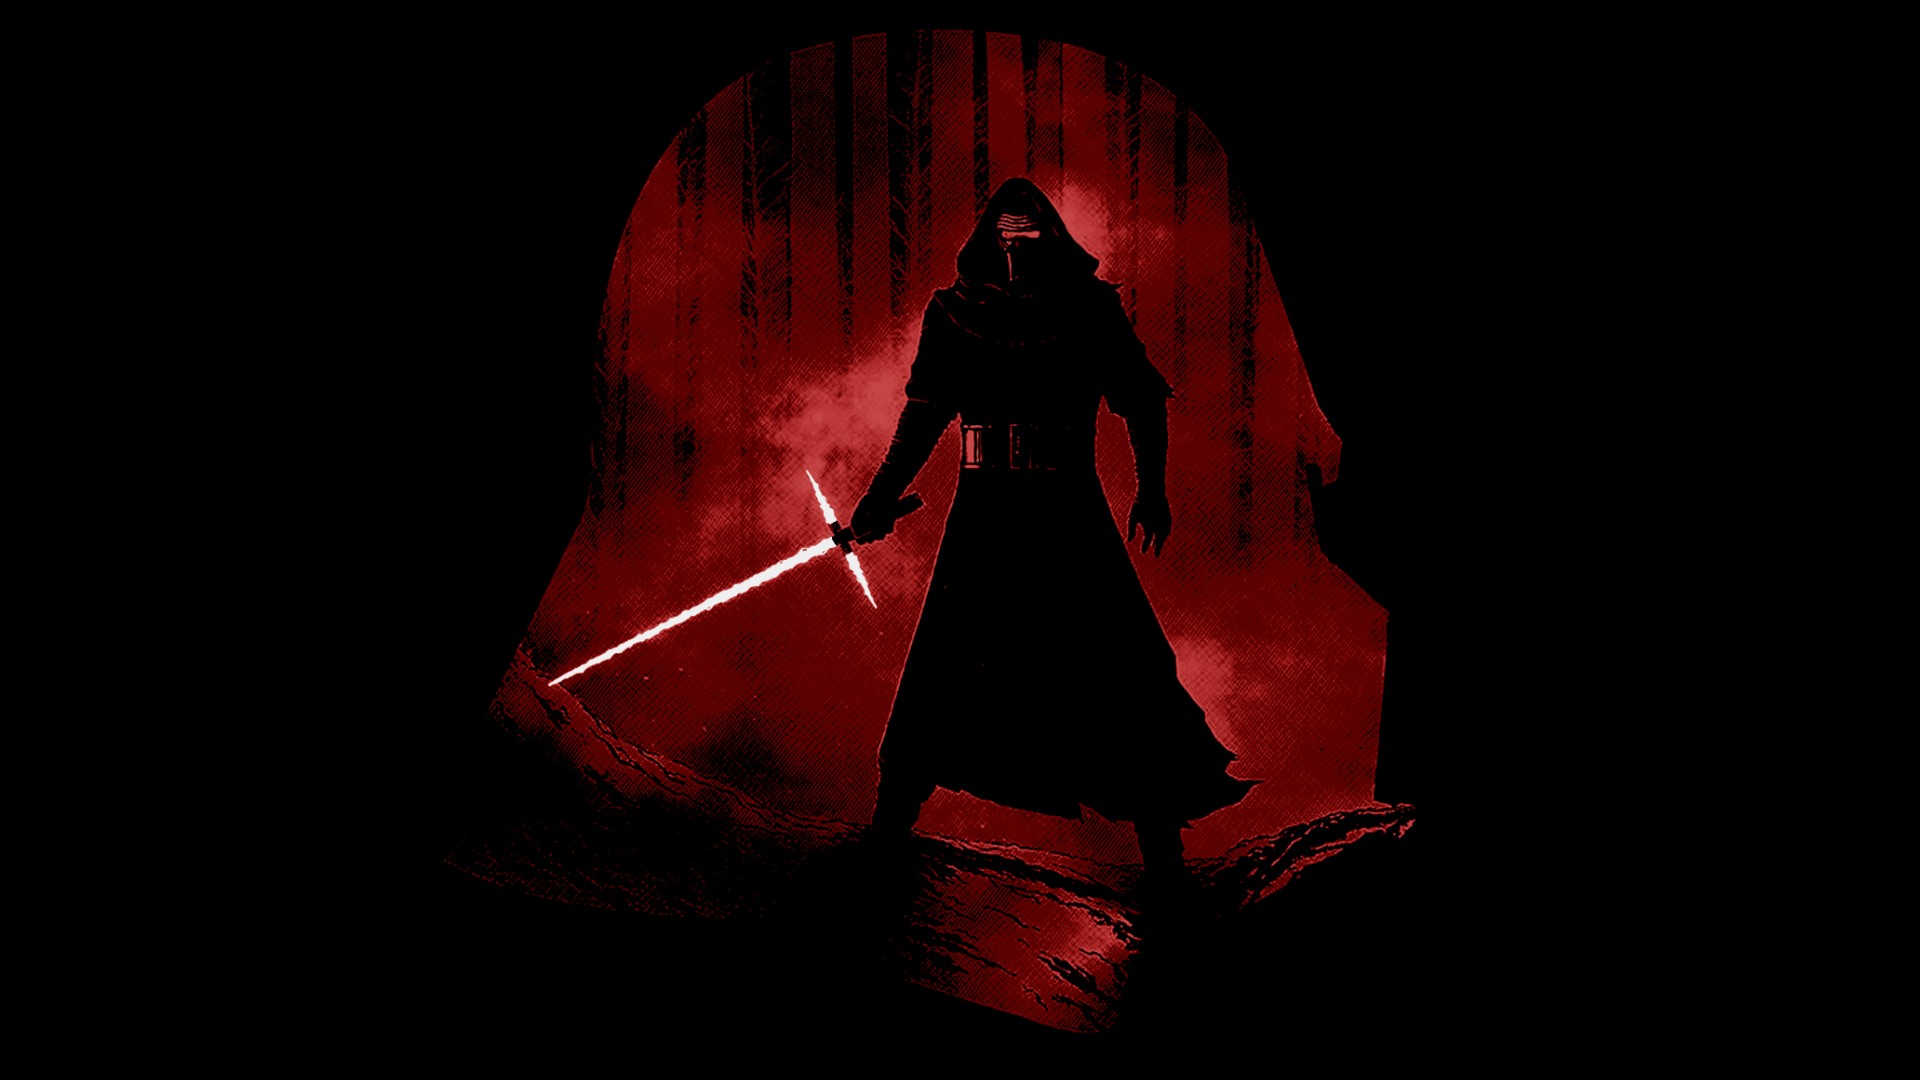 Kylo Ren Wallpaper 1920x1080 ① Download Free Cool Wallpapers For